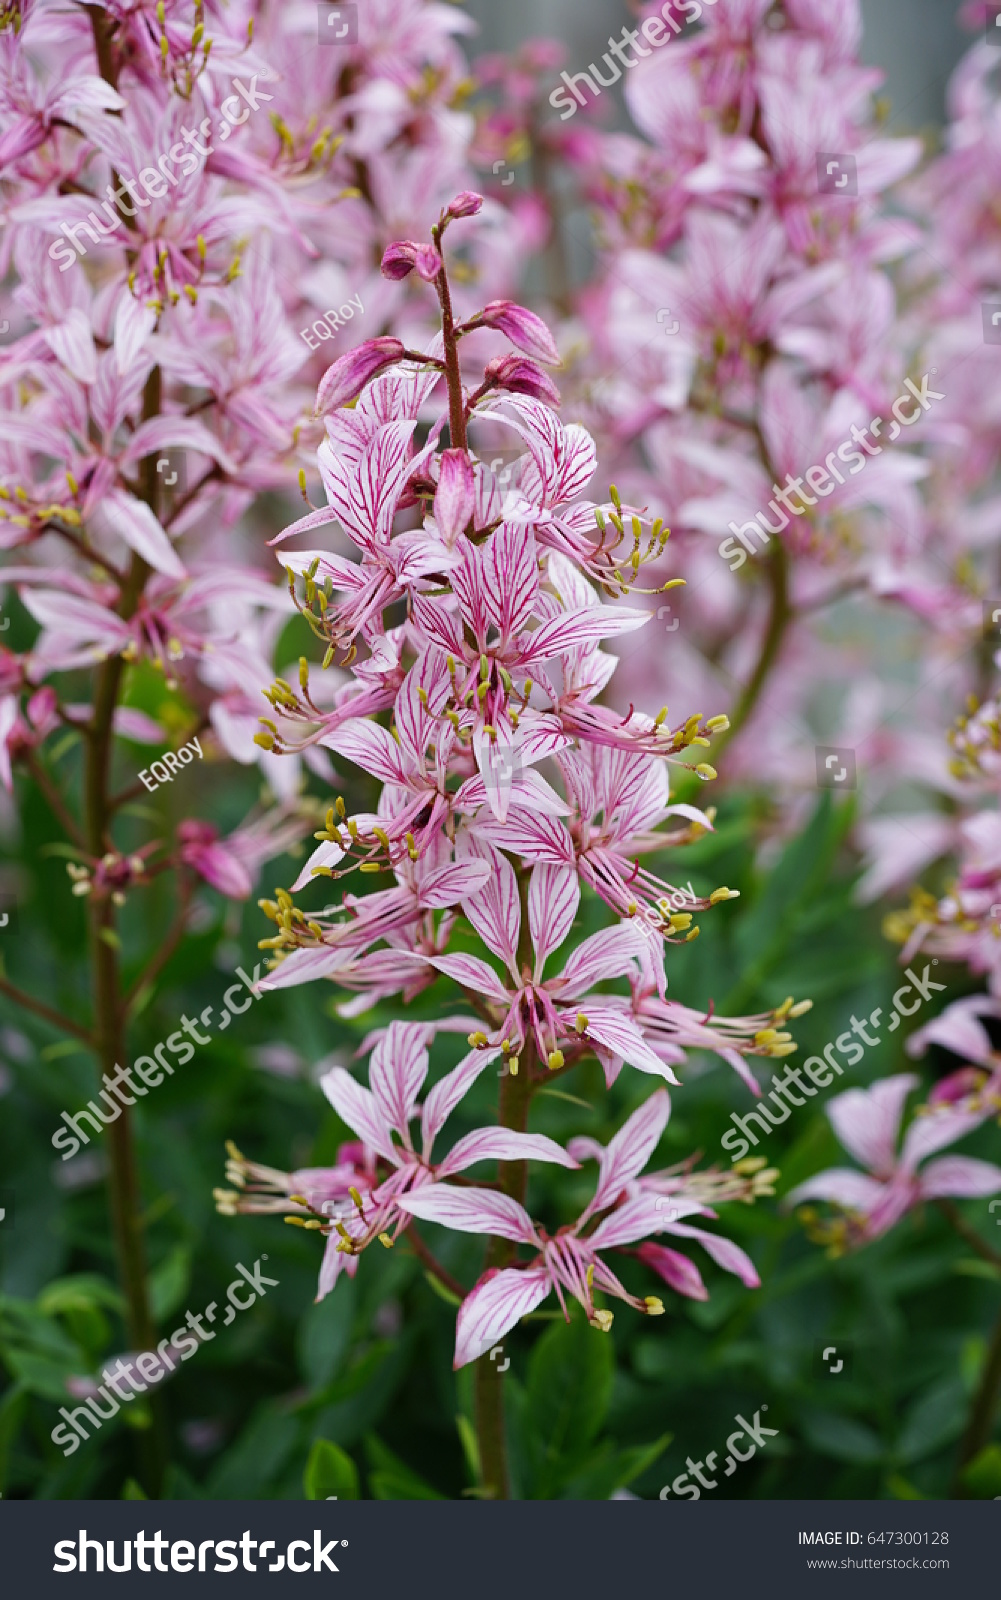 Pink Flower Spikes Dictamnus Gas Plant Nature Stock Image 647300128